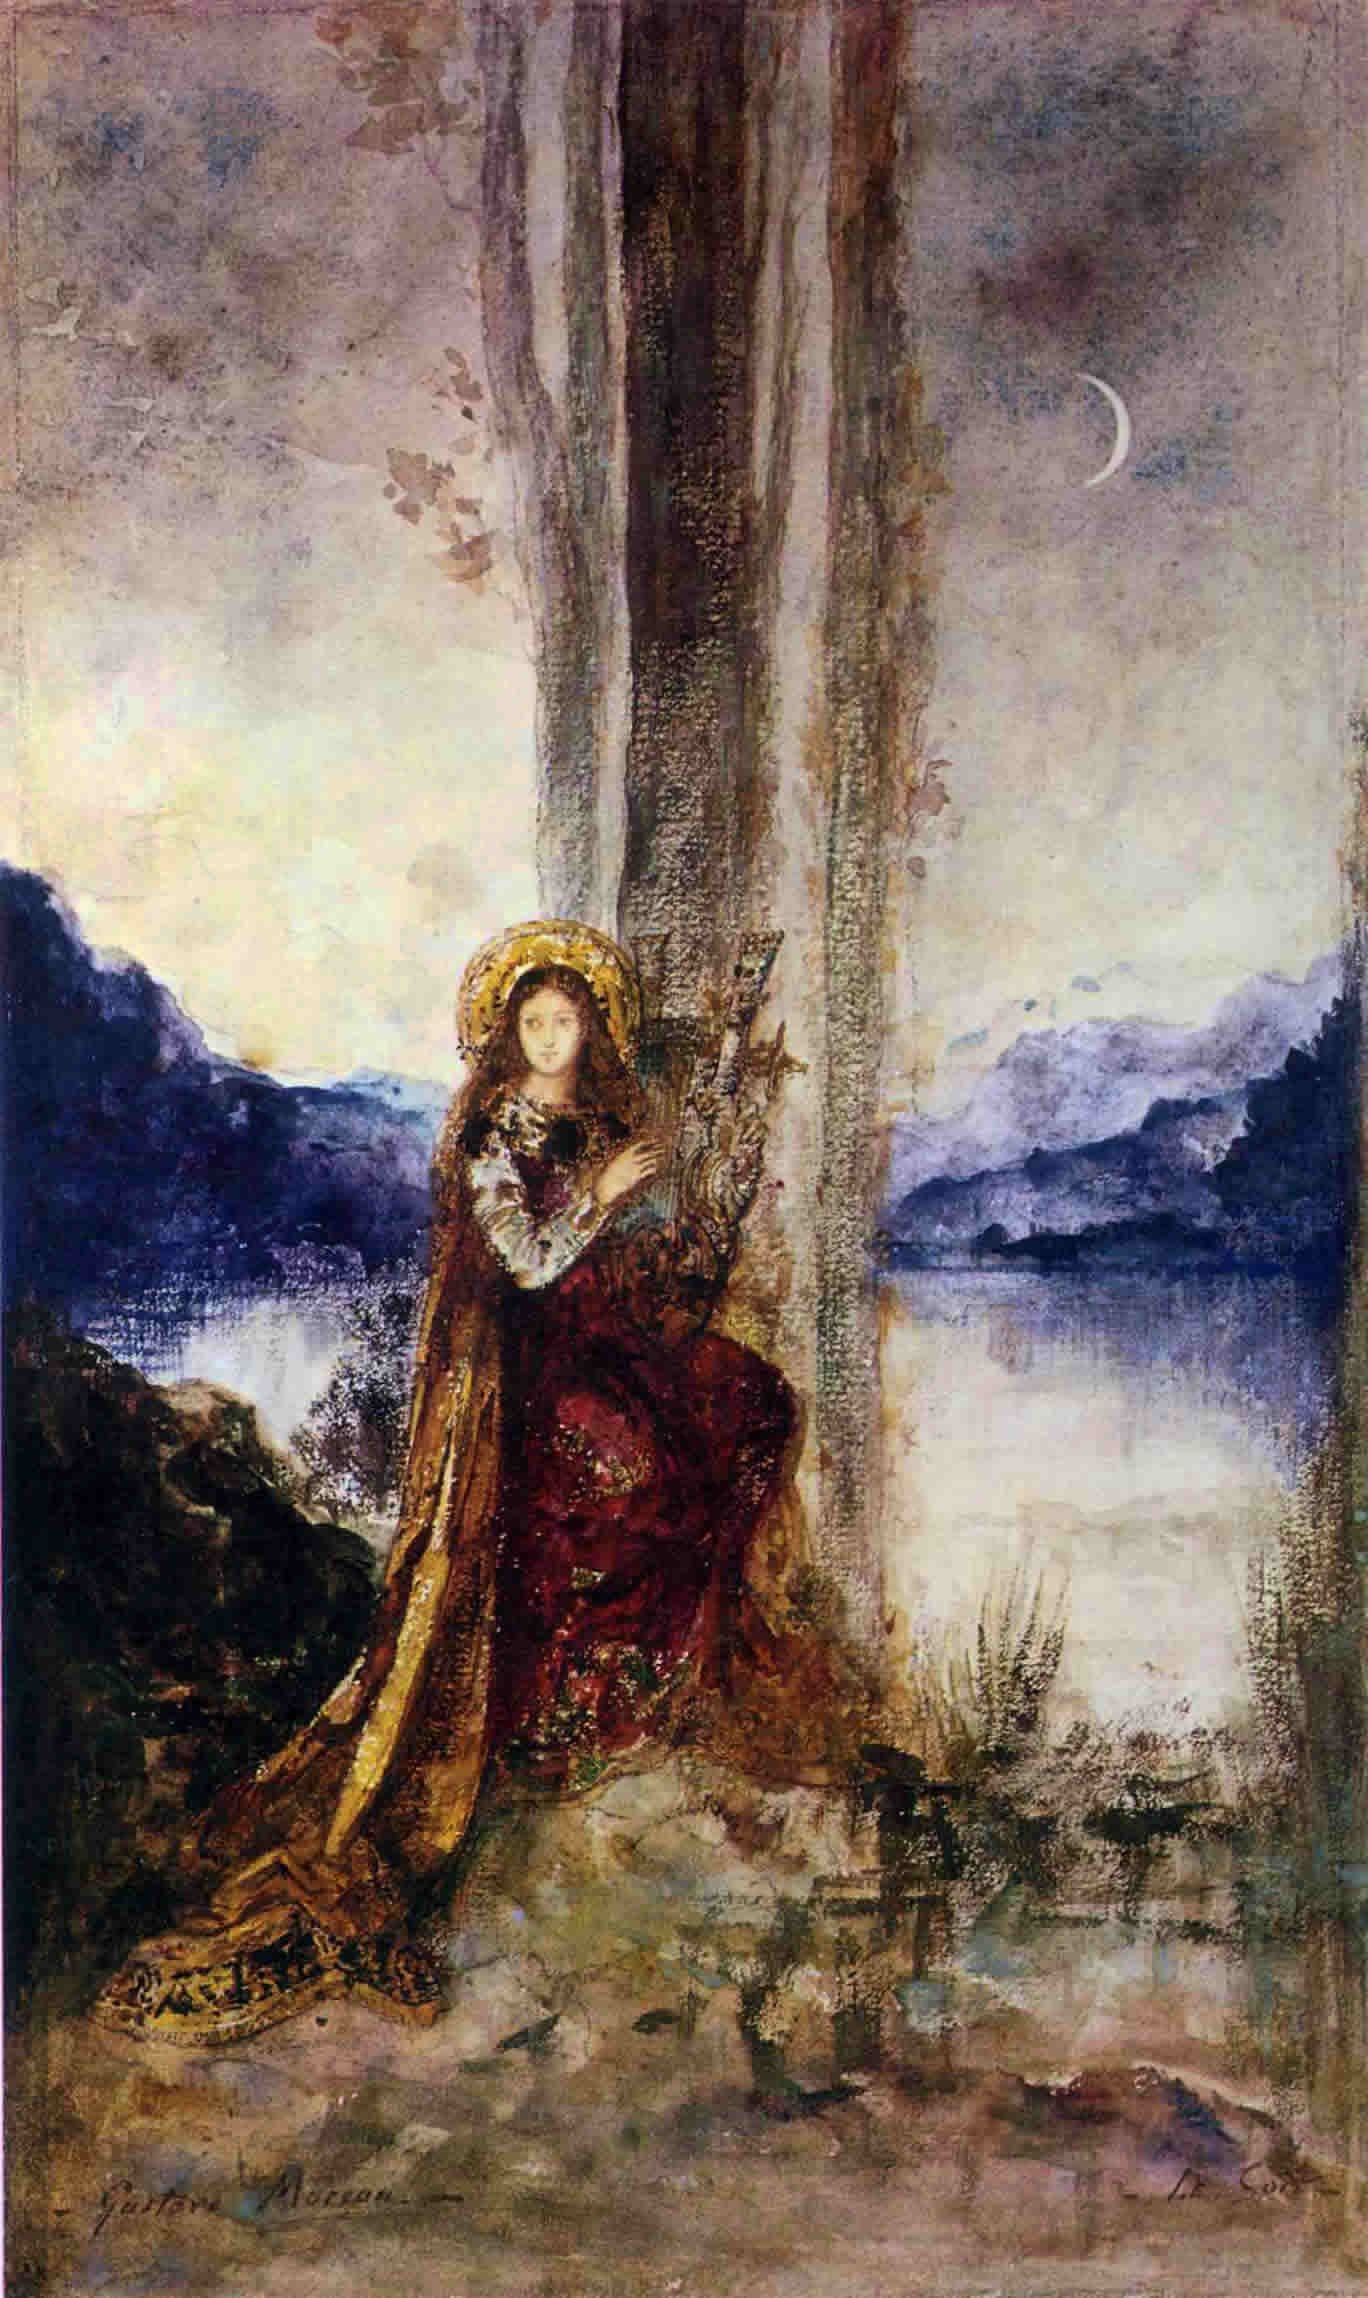 The Evening by Gustave Moreau